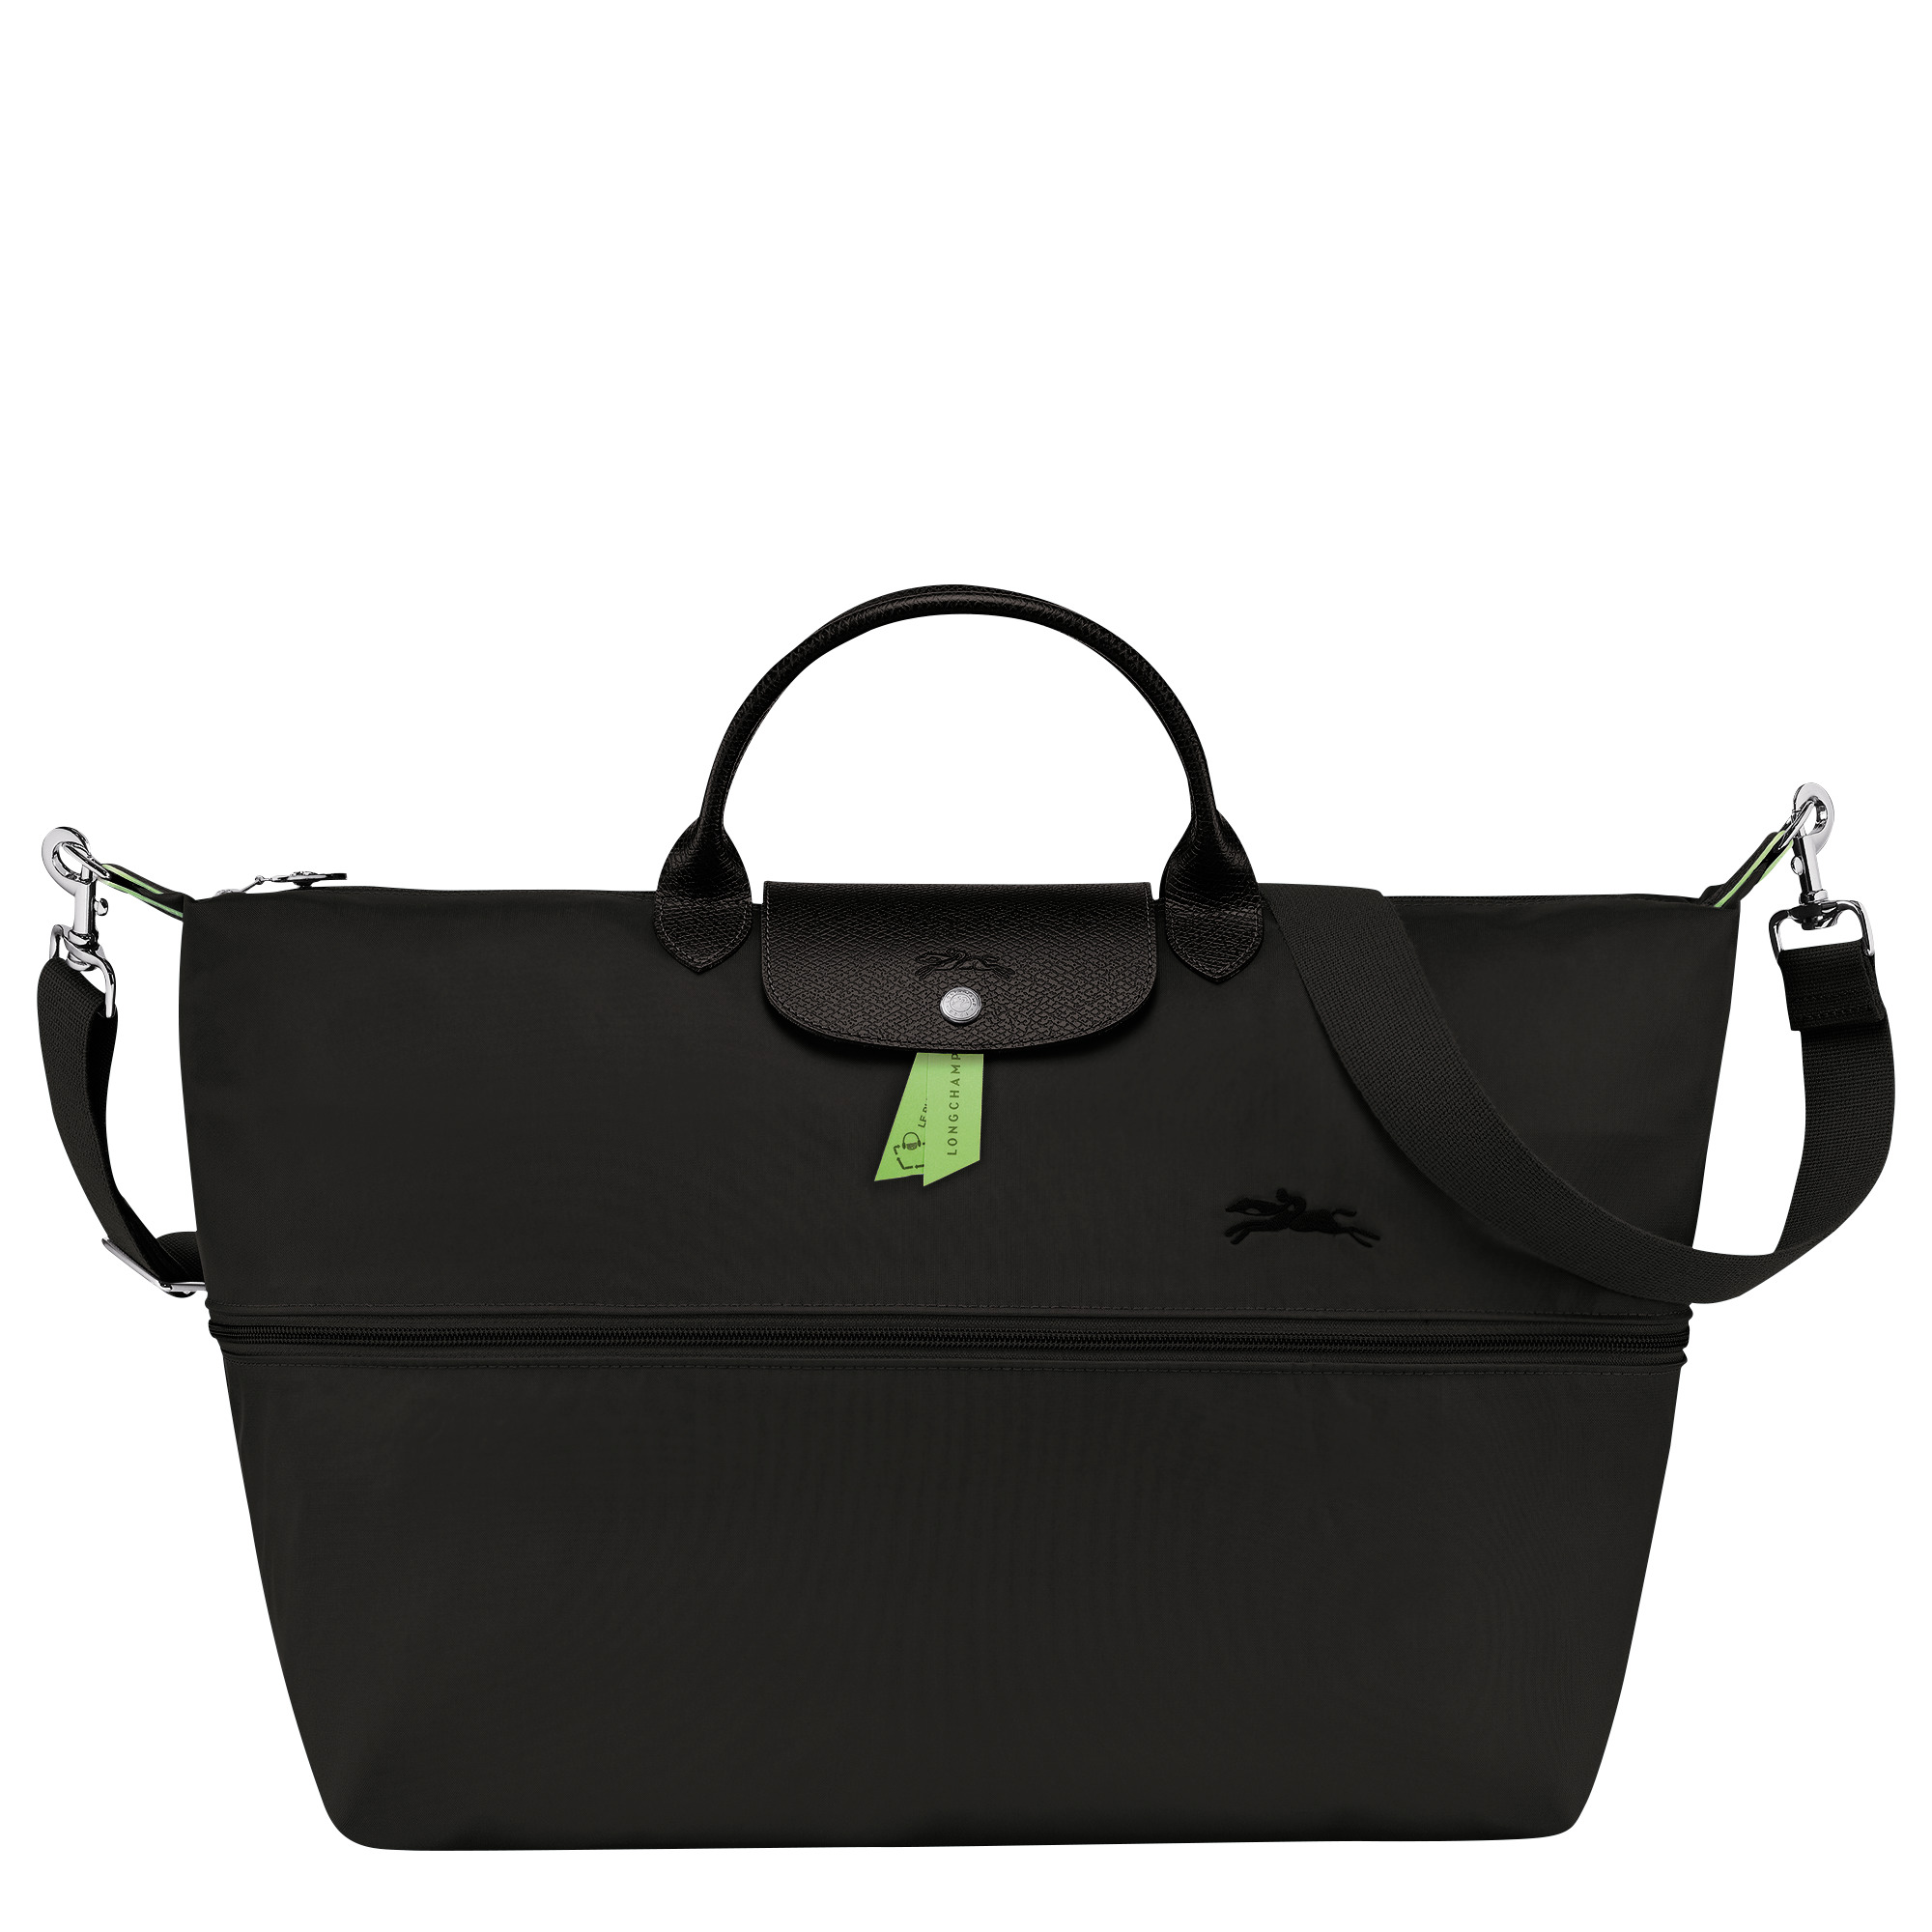 Le Pliage Green Travel bag expandable Black - Recycled canvas - 6